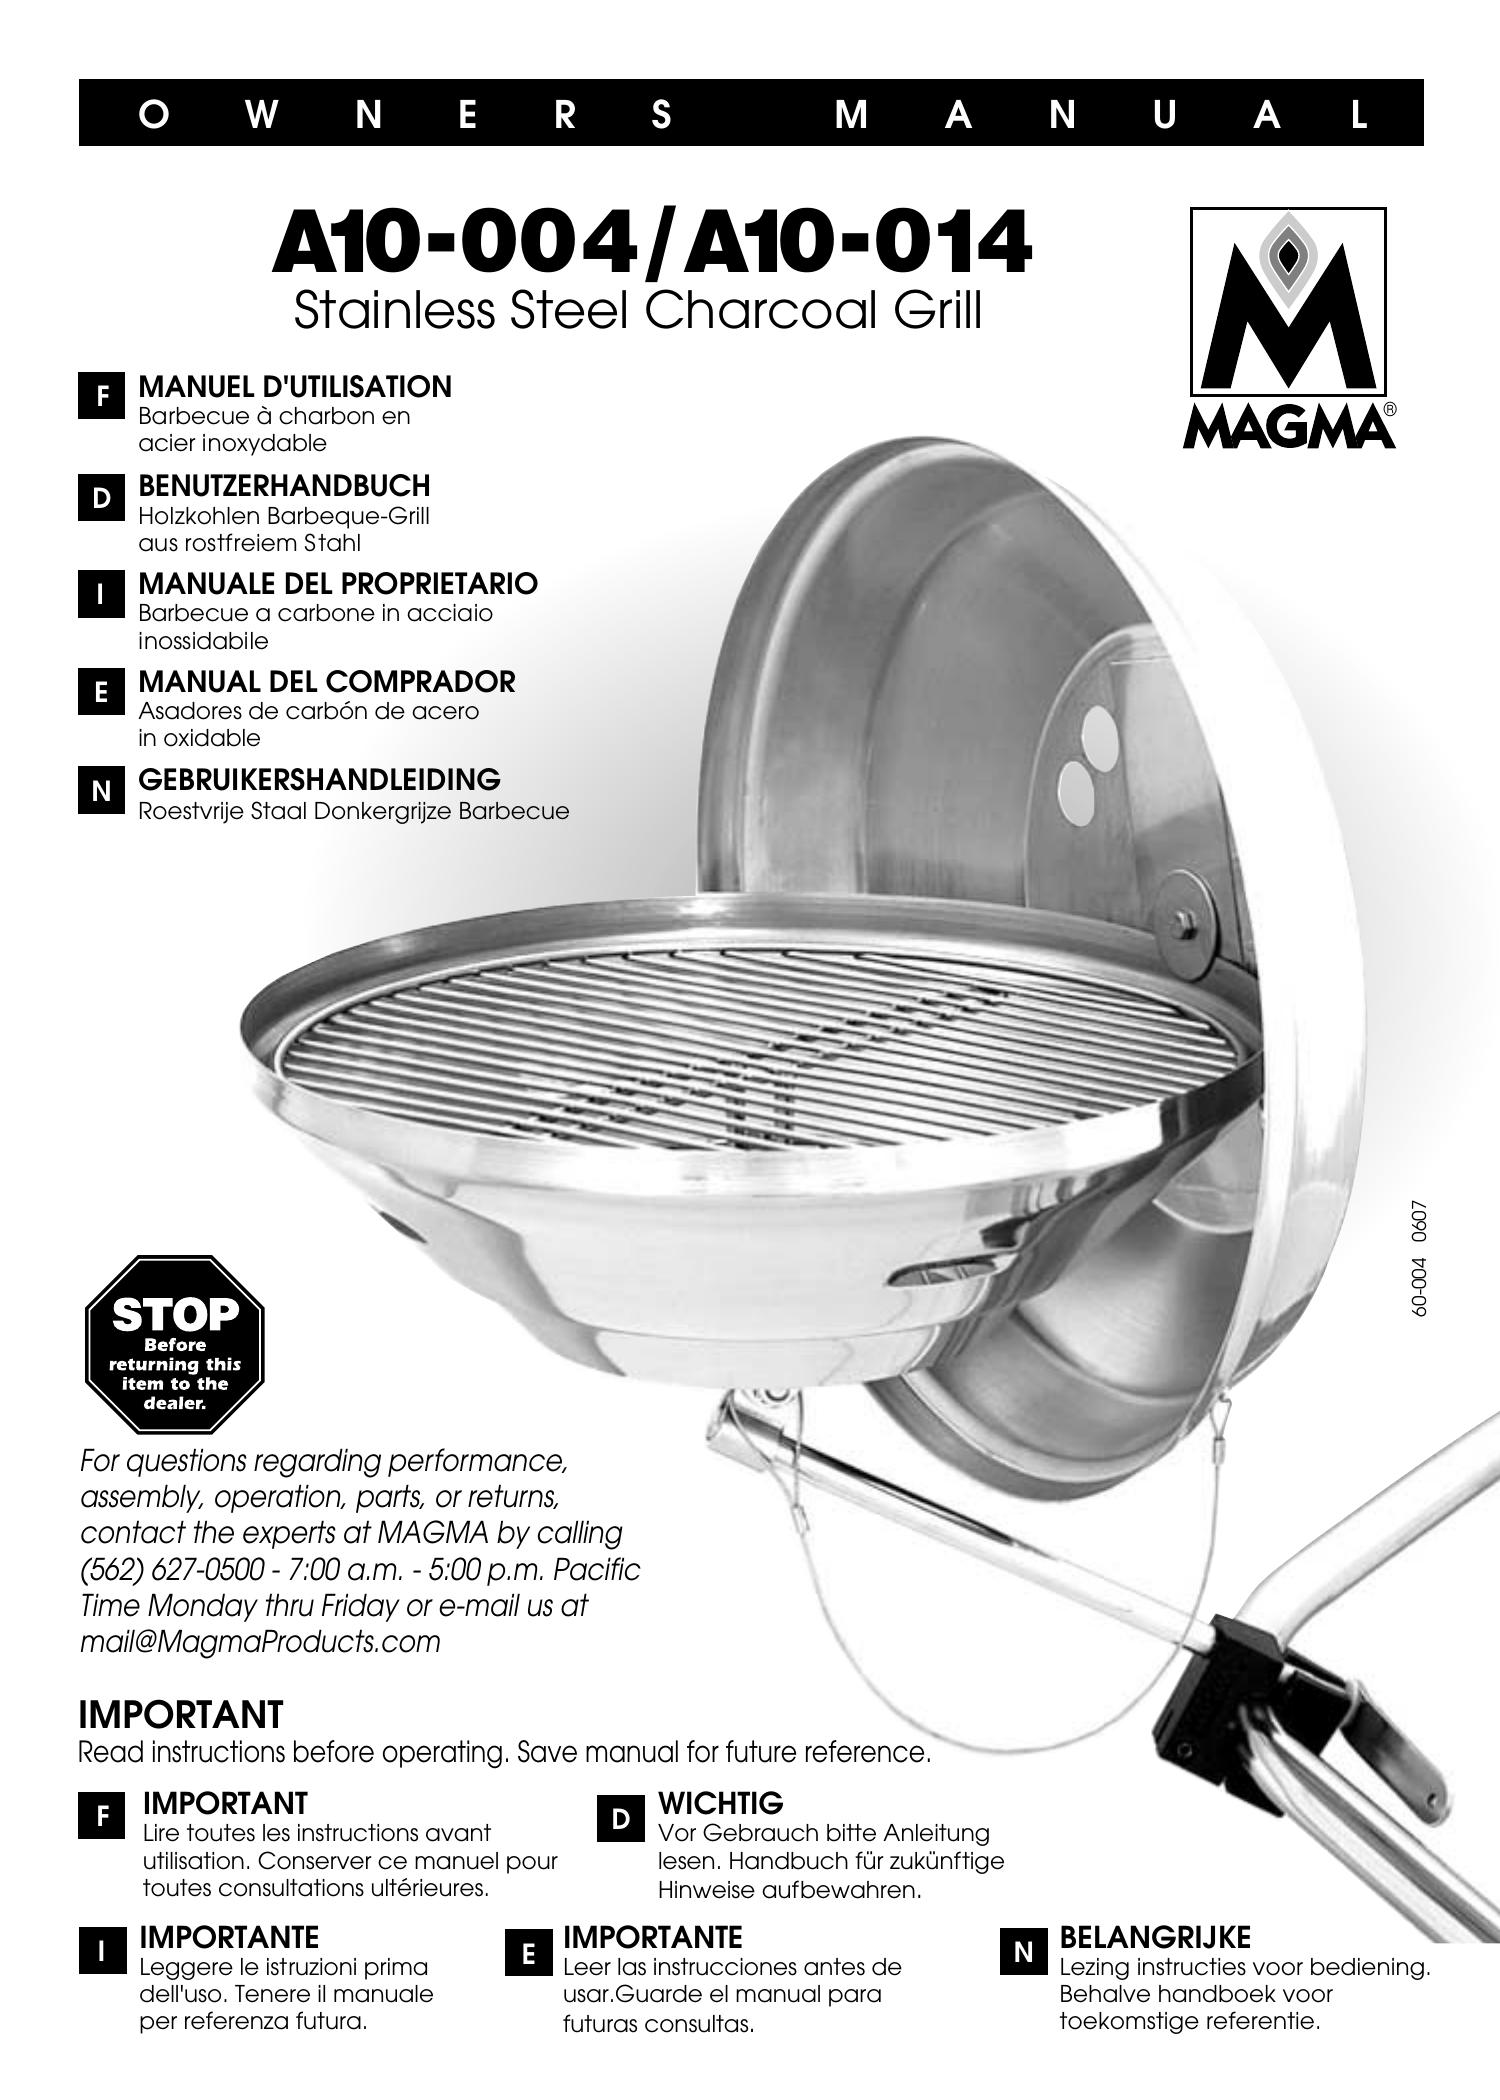 Magma A10-004 Charcoal Grill User Manual